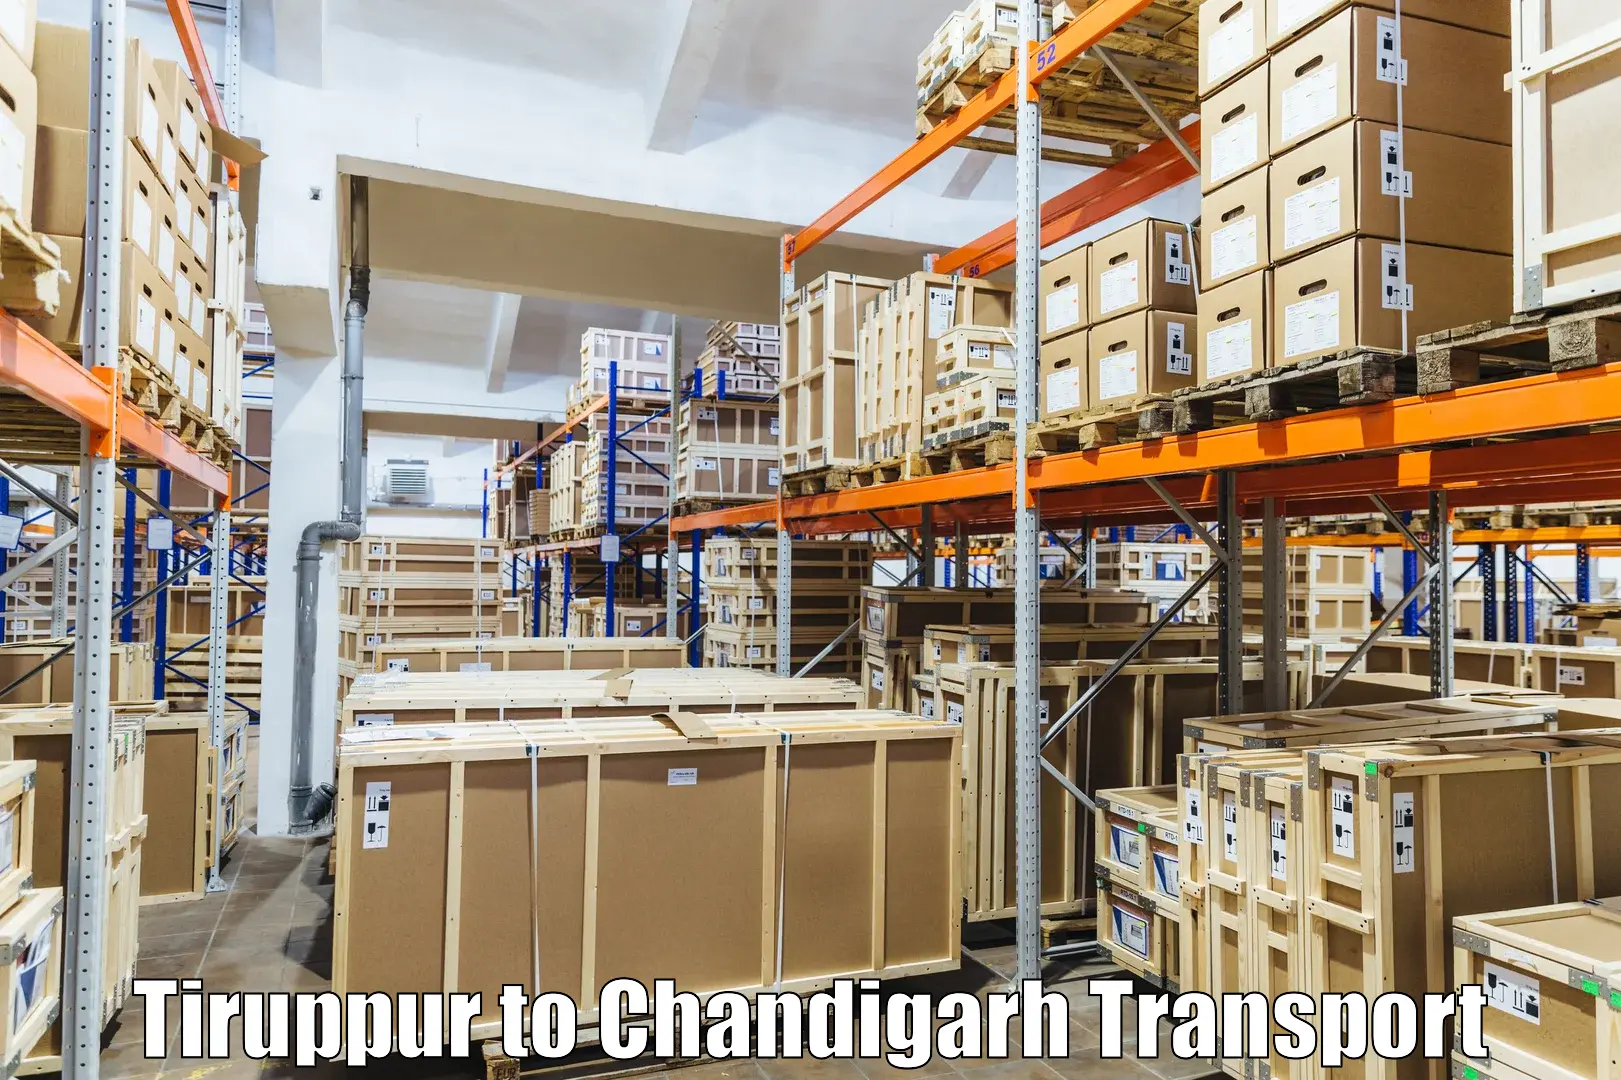 Daily parcel service transport Tiruppur to Chandigarh